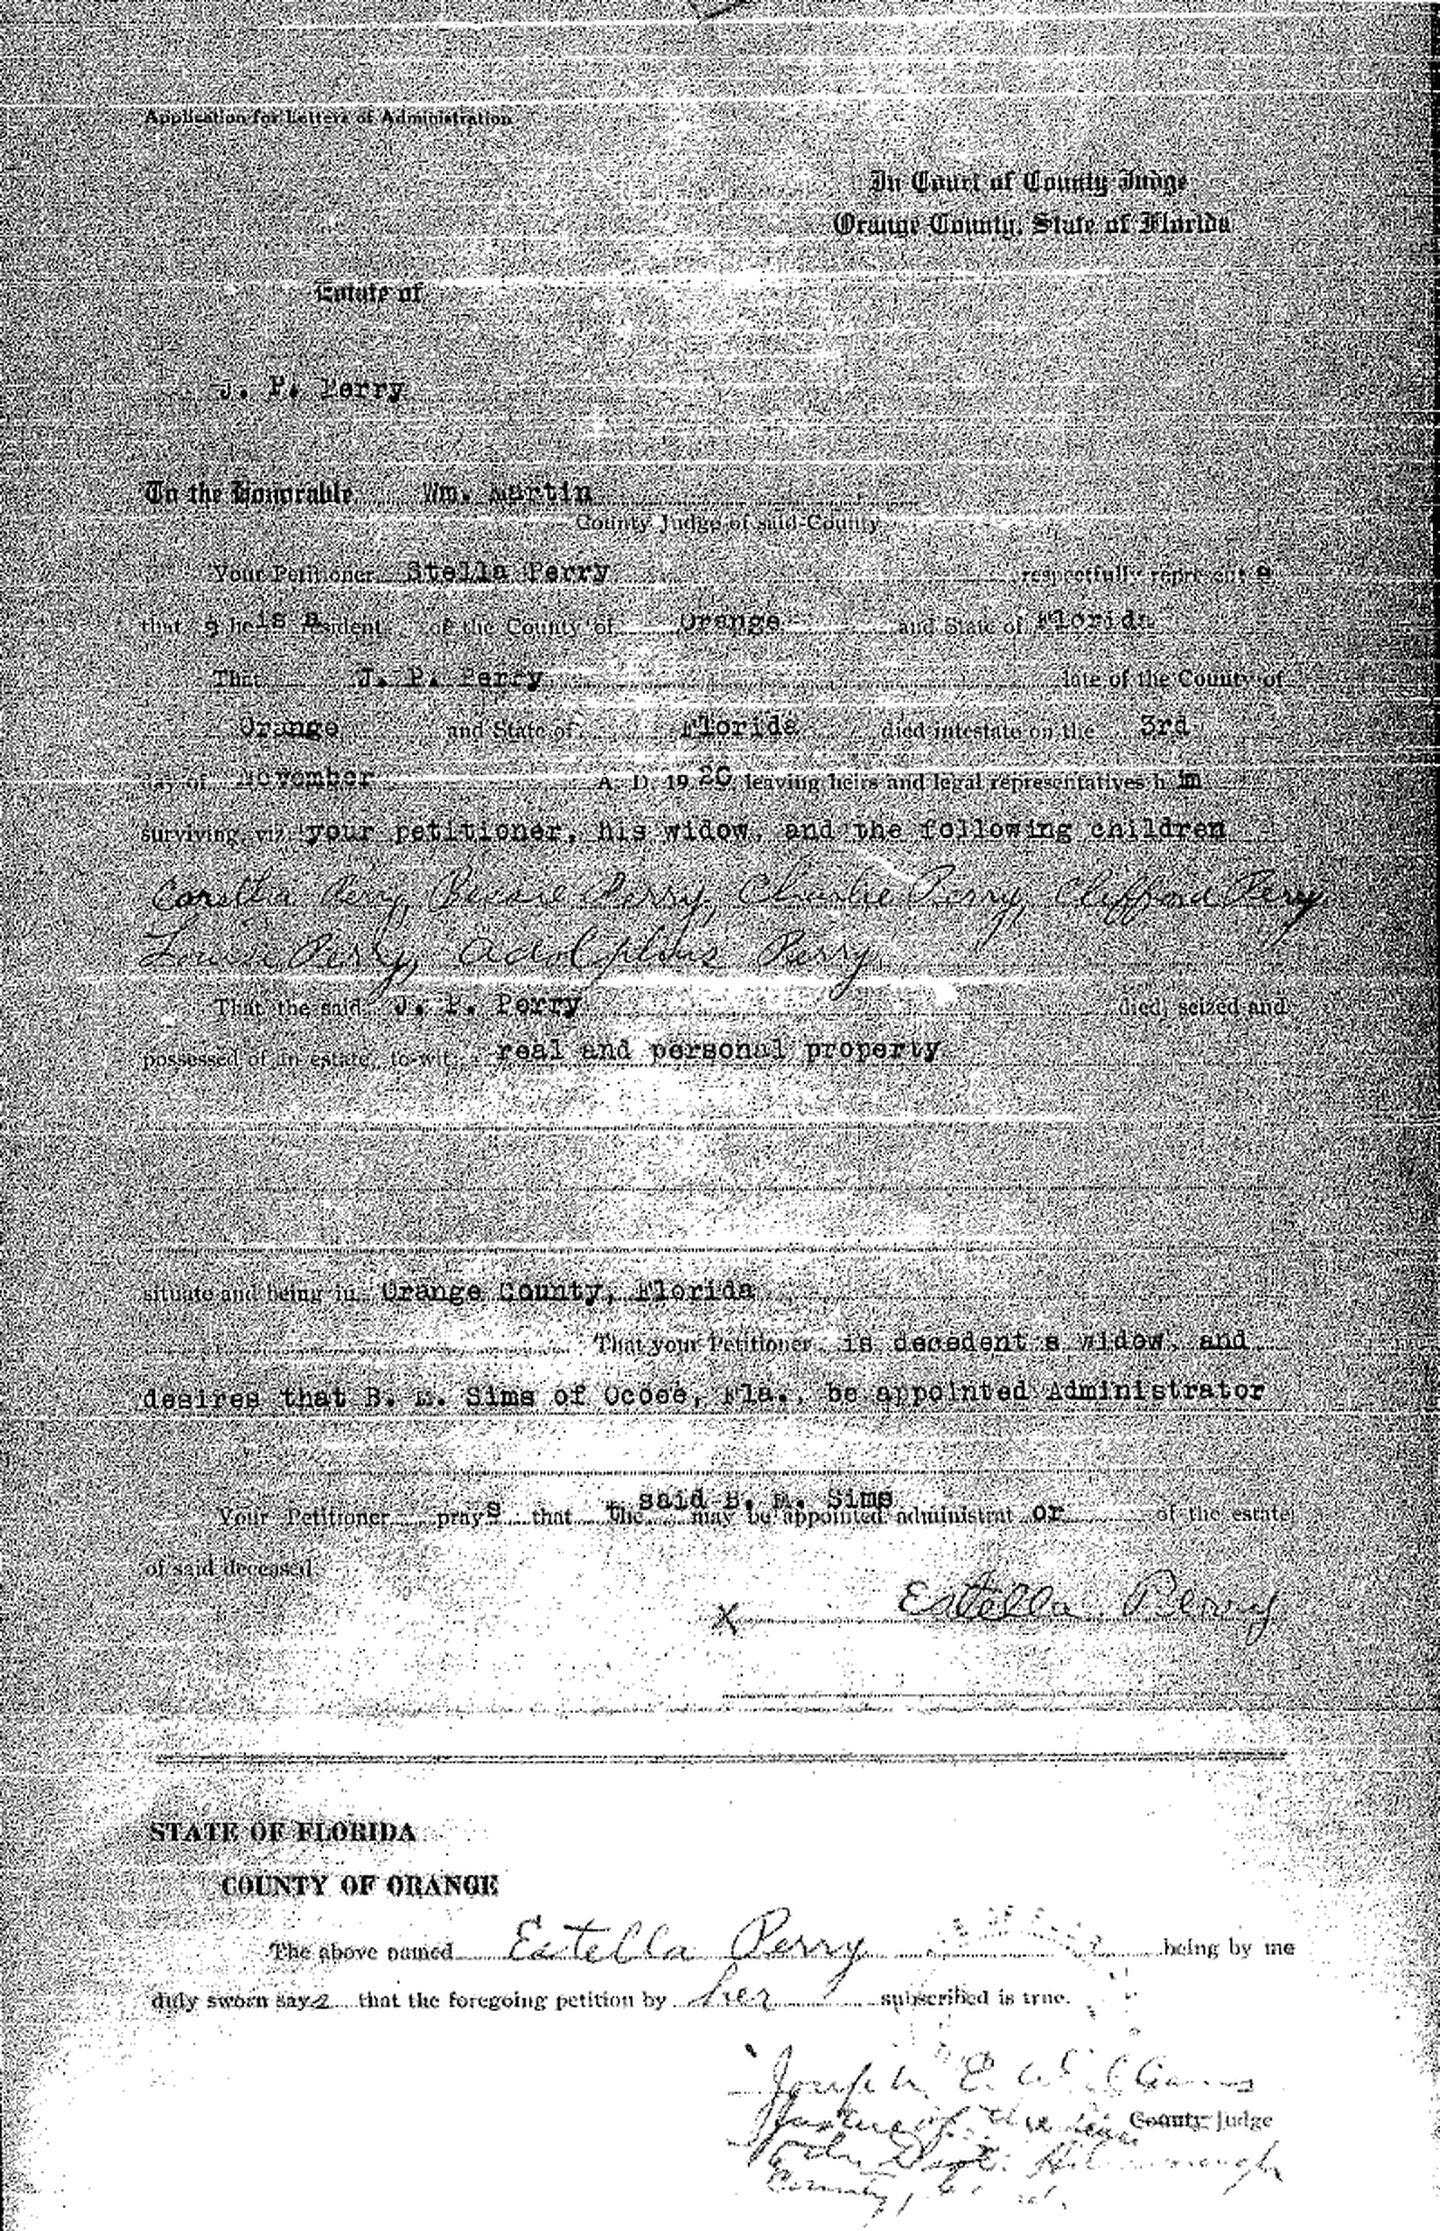 Bluford Sims was appointed administrator of July Perry's estate on November 13, 1920. His wife allegedly petitioned for Sims to be appointed administrator of Perry’s estate.